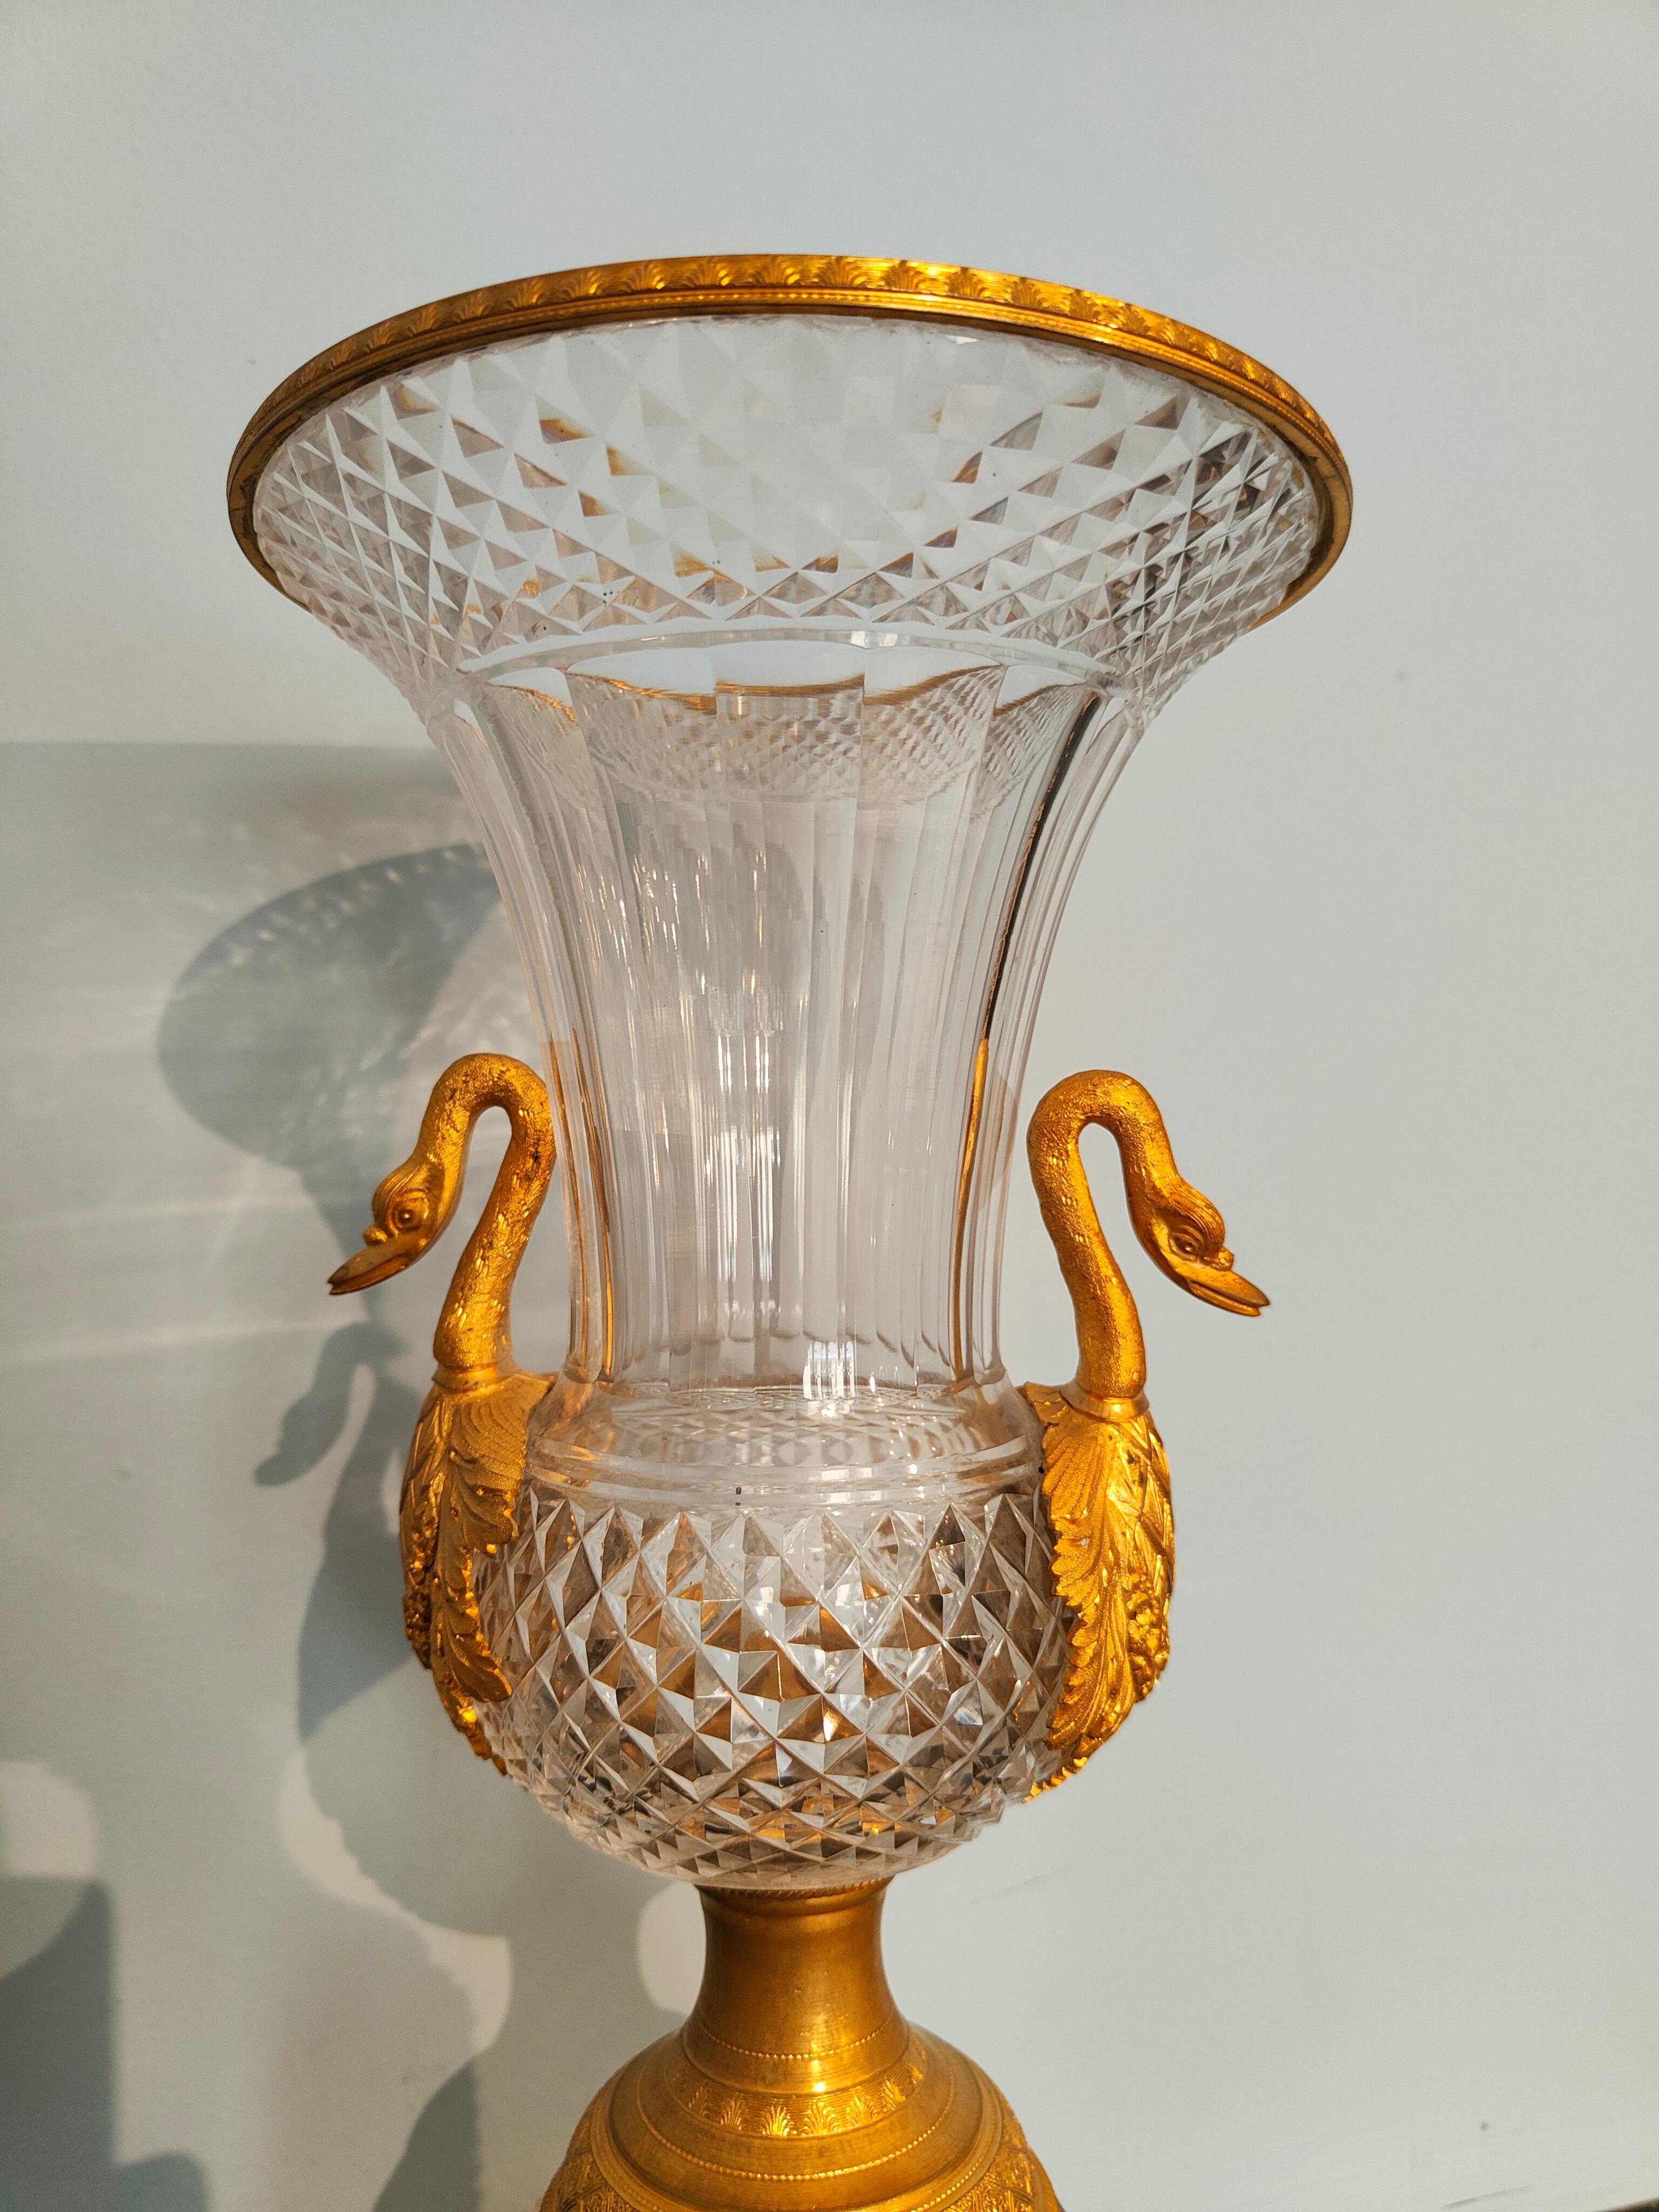 Pair of crystal and bronze Empire Period vases.
Important pair of Empire period vases made in France in the first half of the 19th century. 
The vases are made from refined cut crystal (presumed to be of Russian manufacture) with gilt bronze